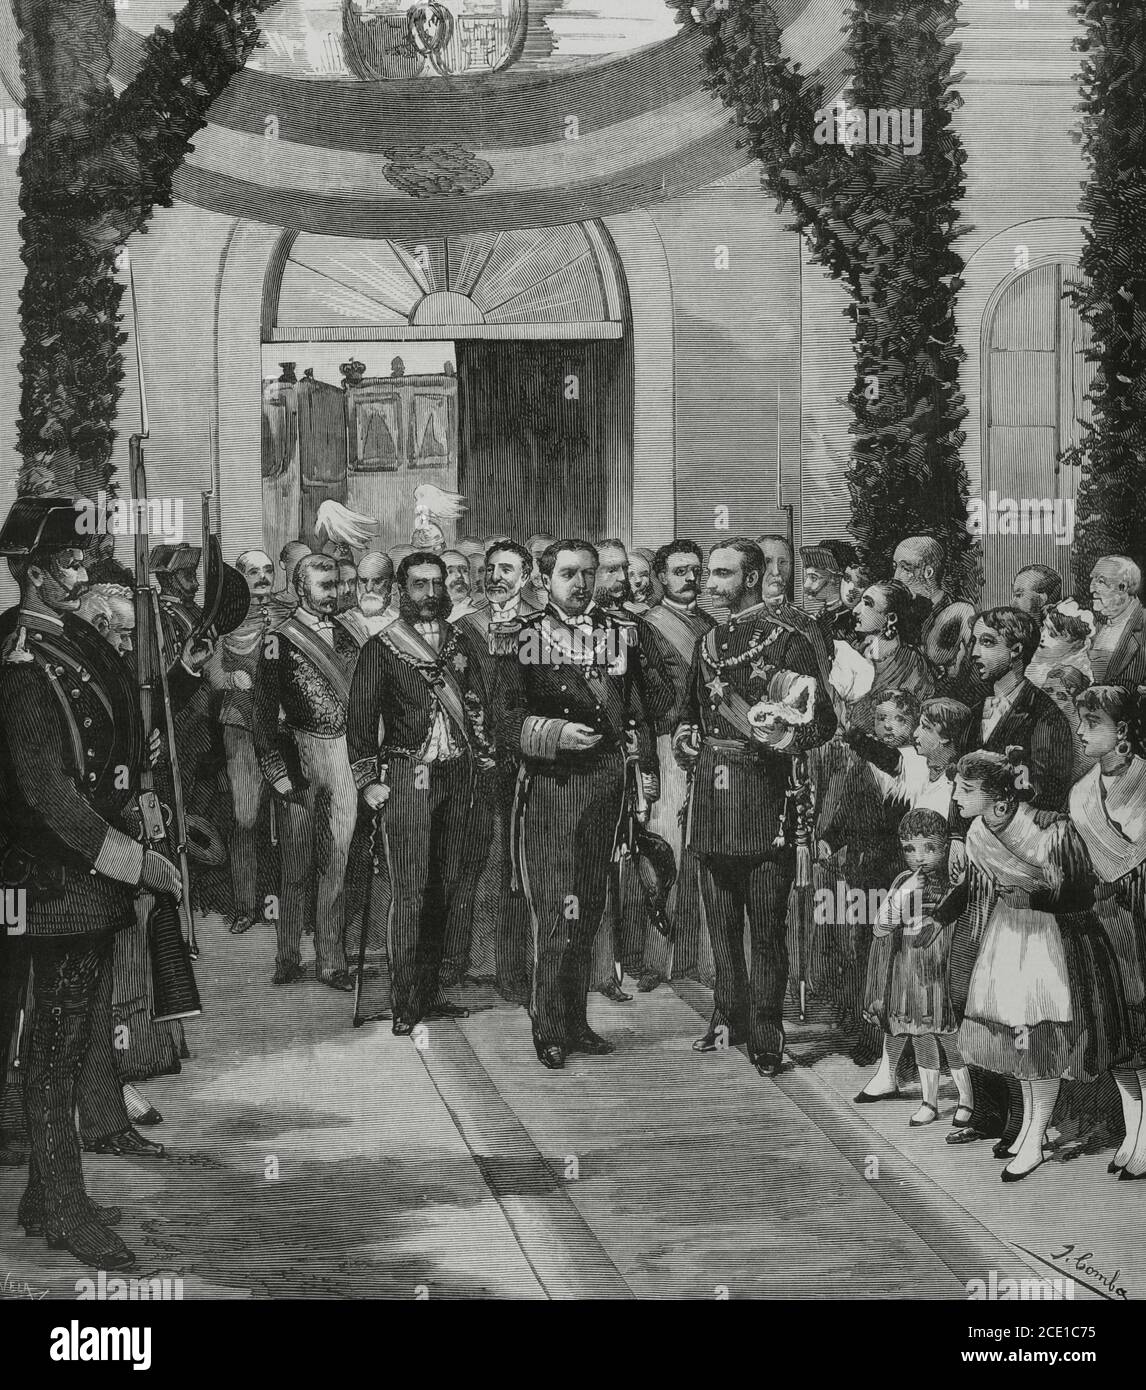 Spain, Extremadura, Caceres province, Valencia de Alcántara. King Alfonso XII of Spain (1857-1885) and King Luis I of Portugal (1838-1889) on the occasion of the inauguration of the Madrid-Lisbon railway line, October 8, 1881. The kings leaving the station. Life drawing by Juan Comba. Engraving by Vela. La Ilustracion Española y Americana, 1881. Stock Photo